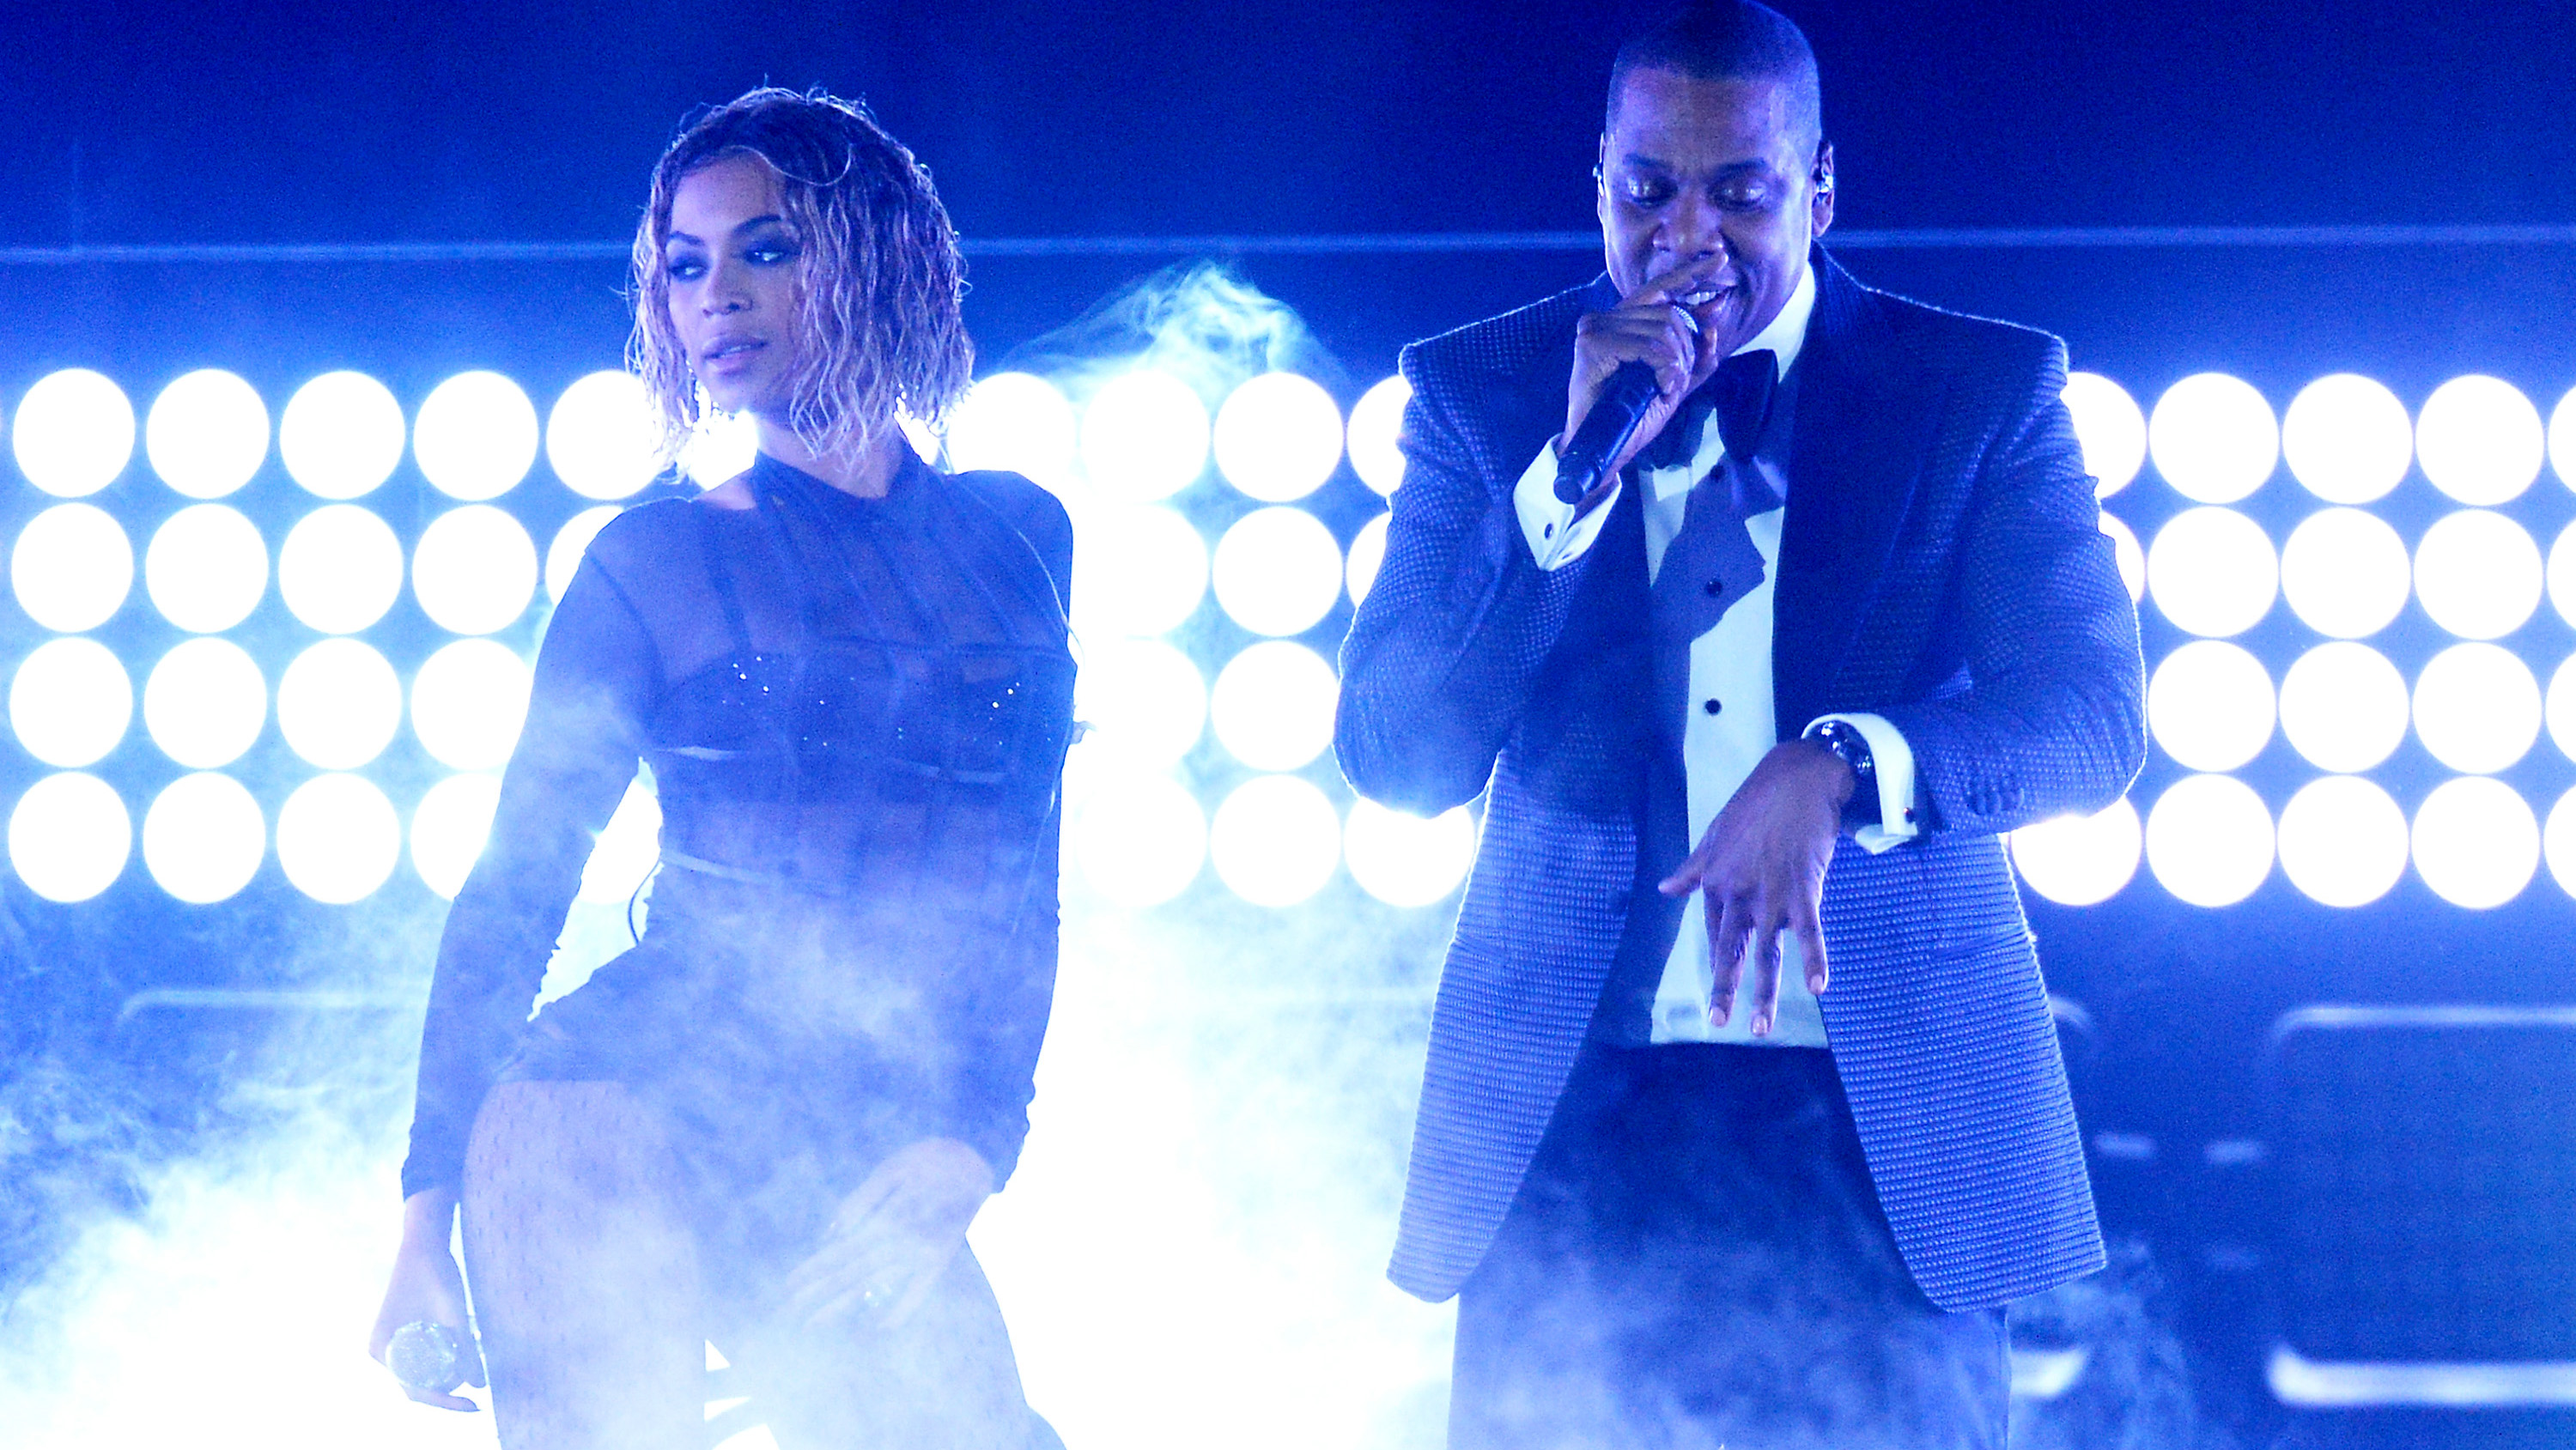 LOS ANGELES, CA - JANUARY 26:Singer Beyonce and rapper Jay Z perform onstage during the 56th GRAMMY Awards at Staples Center on January 26, 2014 in Los Angeles, California.(Photo by Kevork Dj